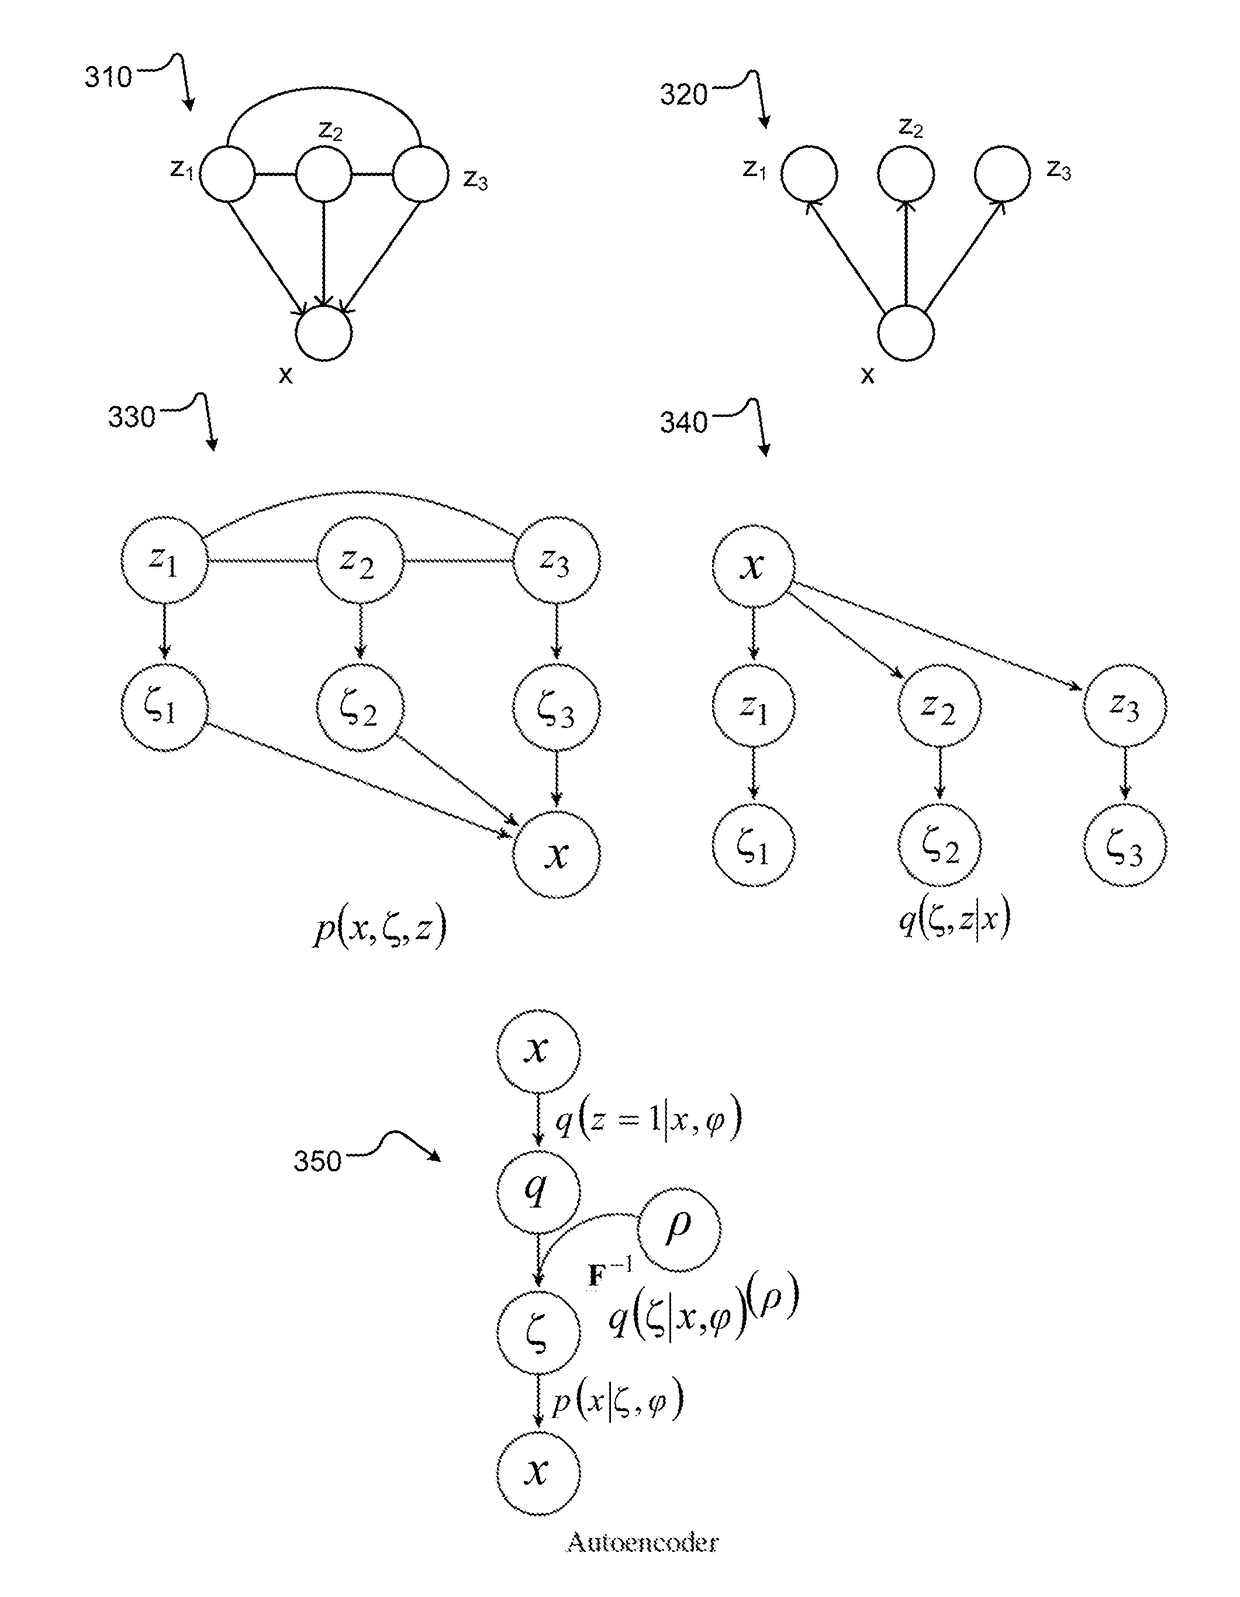 Discrete variational auto-encoder systems and methods for machine learning using adiabatic quantum computers